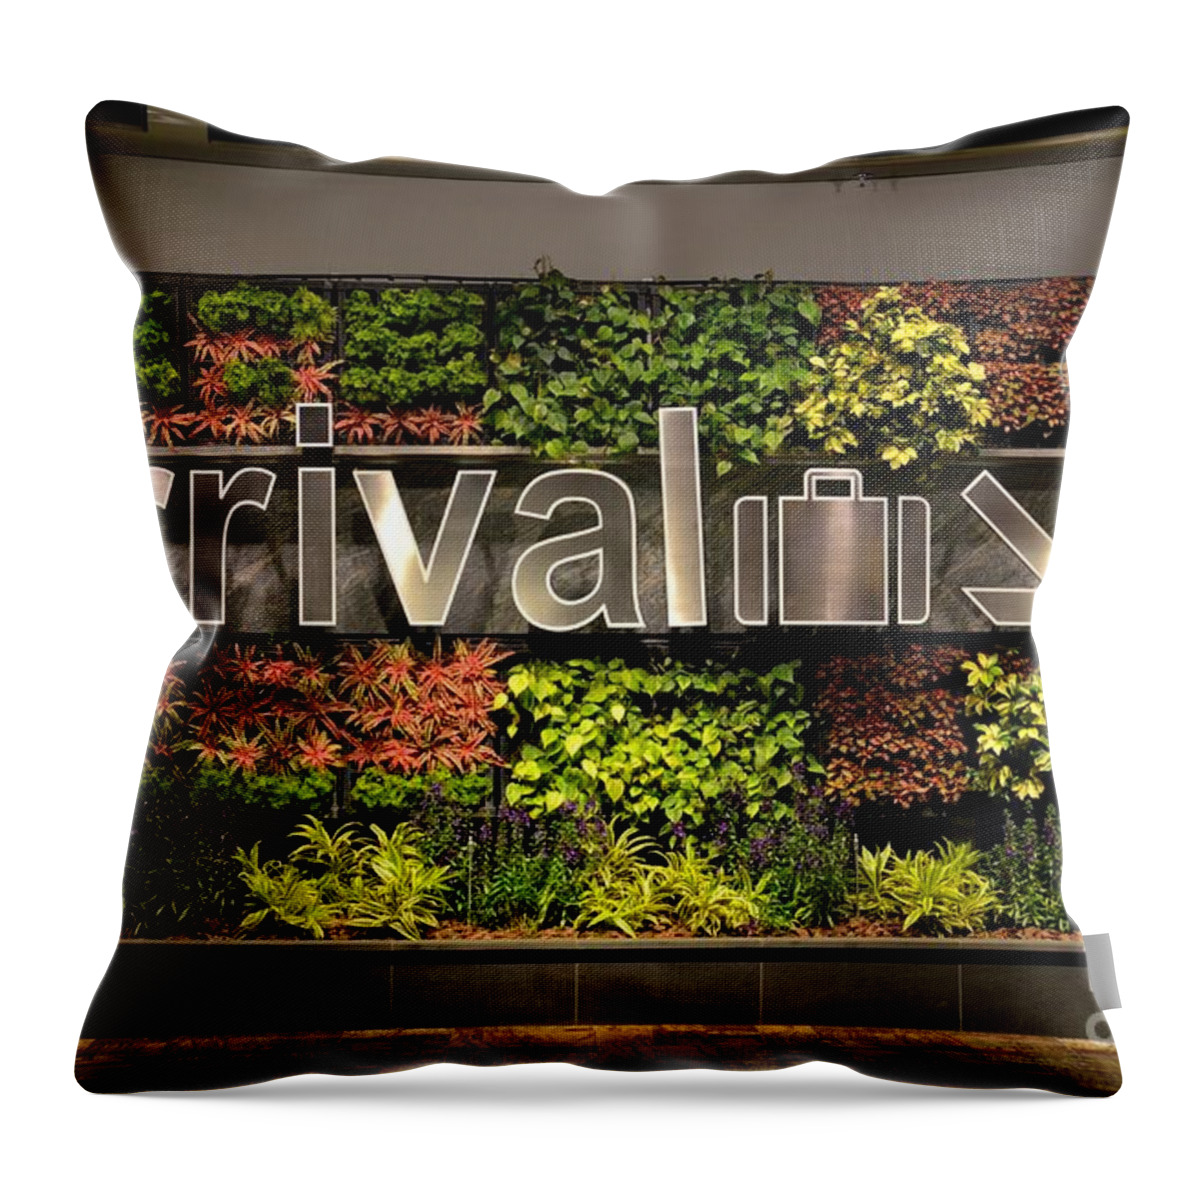  Arrival Throw Pillow featuring the photograph Arrival sign arrow and flowers at Singapore Changi airport by Imran Ahmed